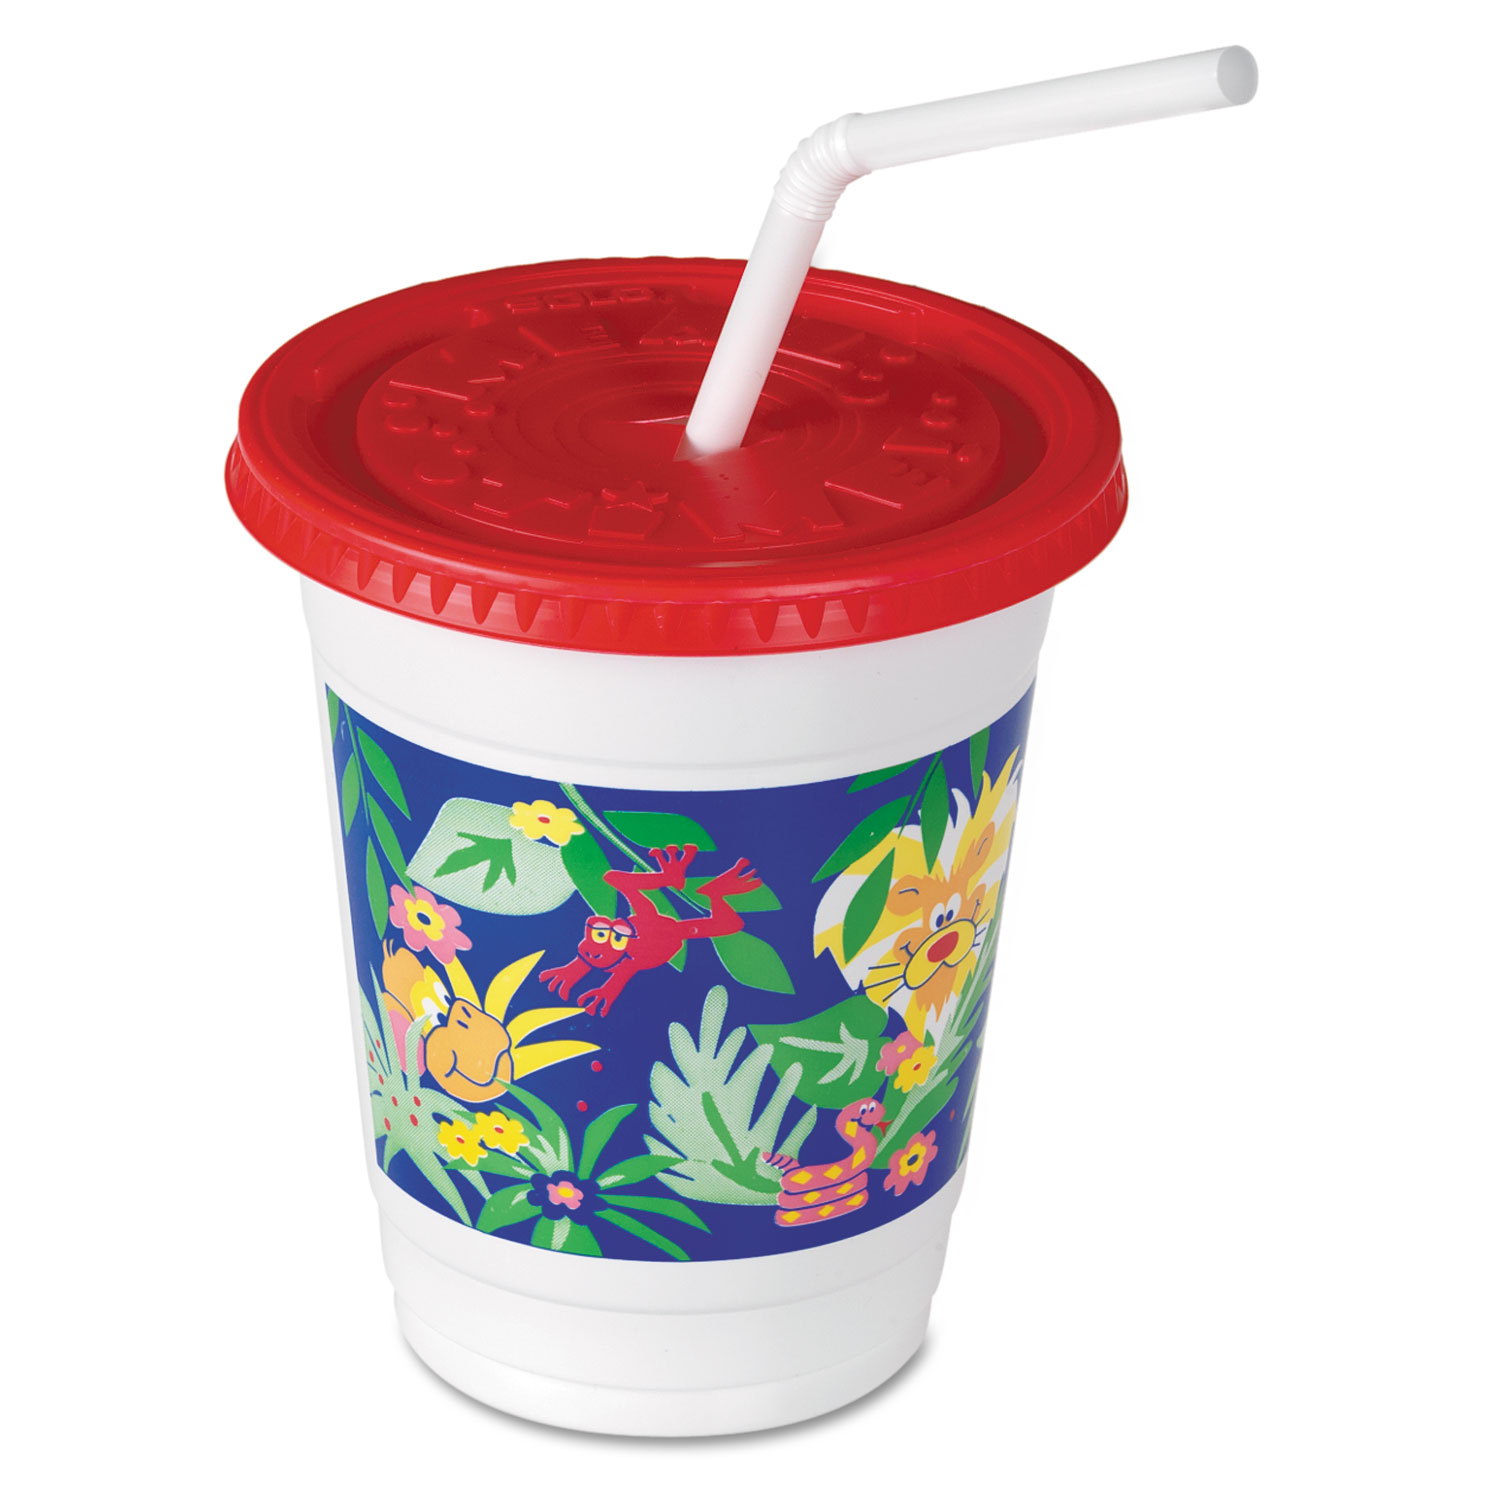 Kids Cups. Cup with Lid picture for Kids. Children's Cup. Kids Cup Desk. Kids cup